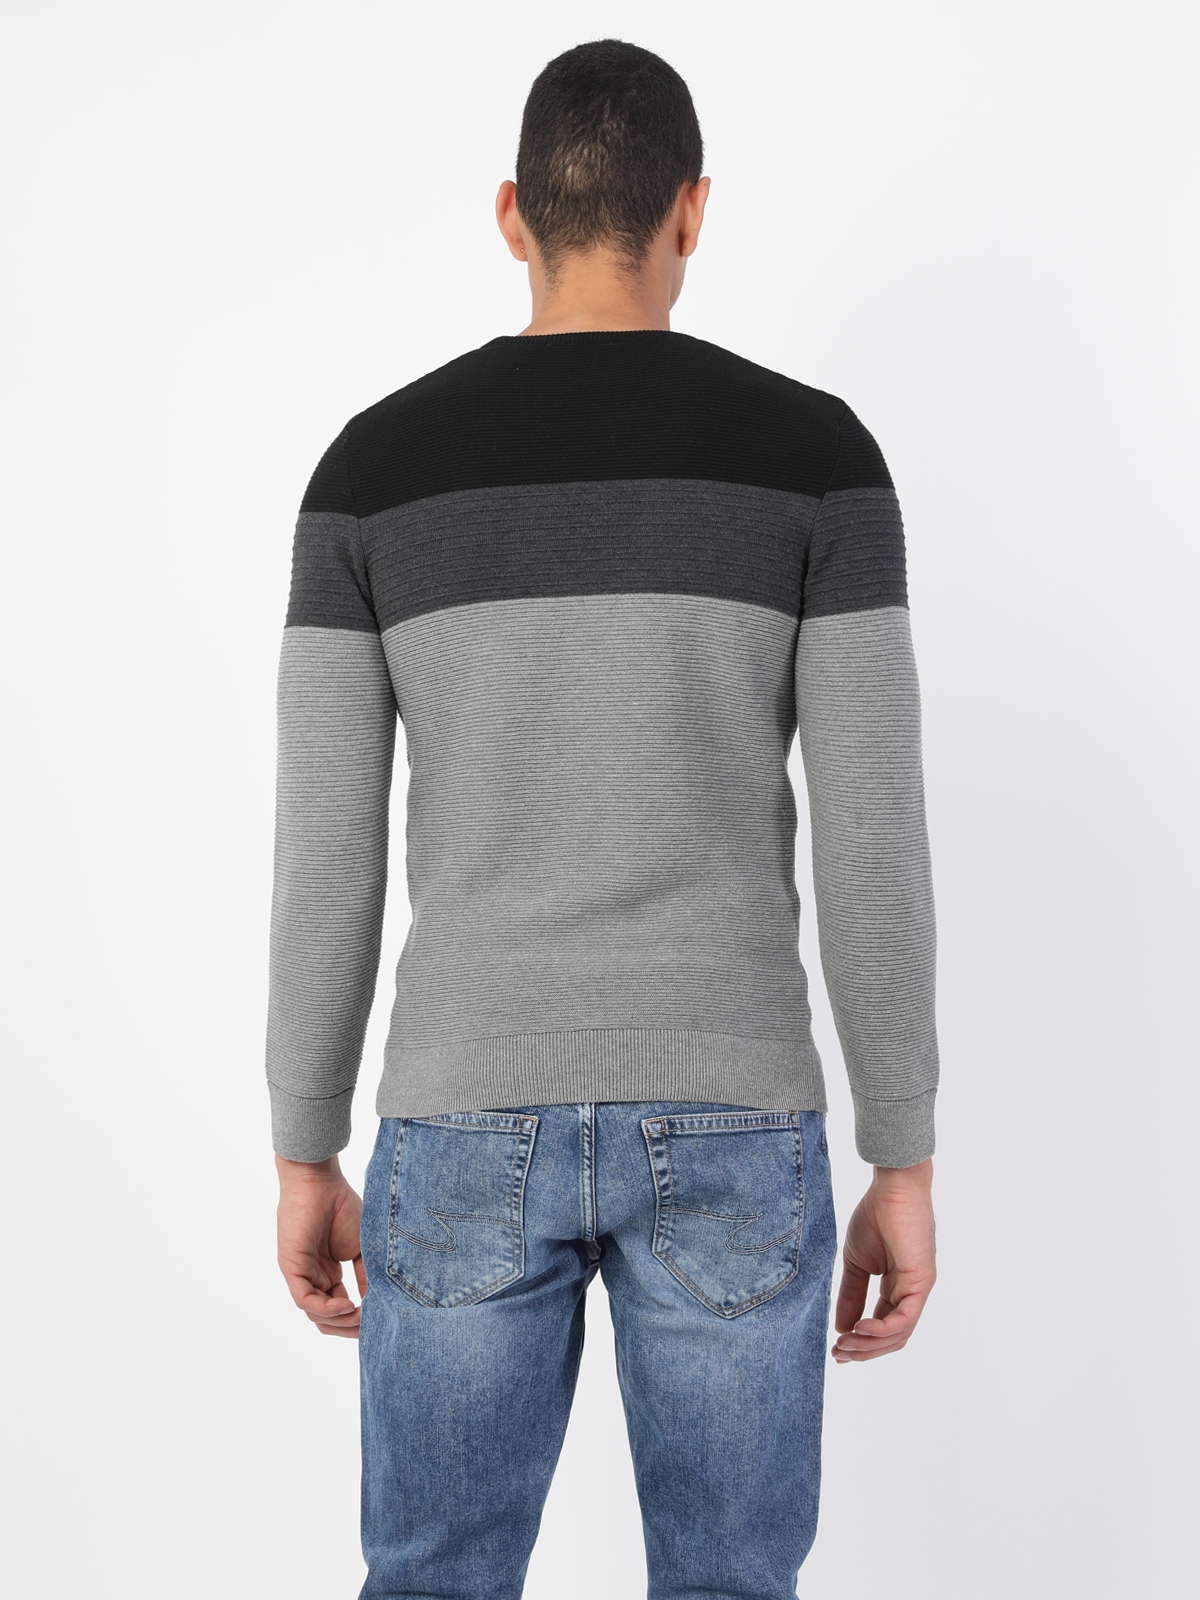 Colins Men Sweaters. 2